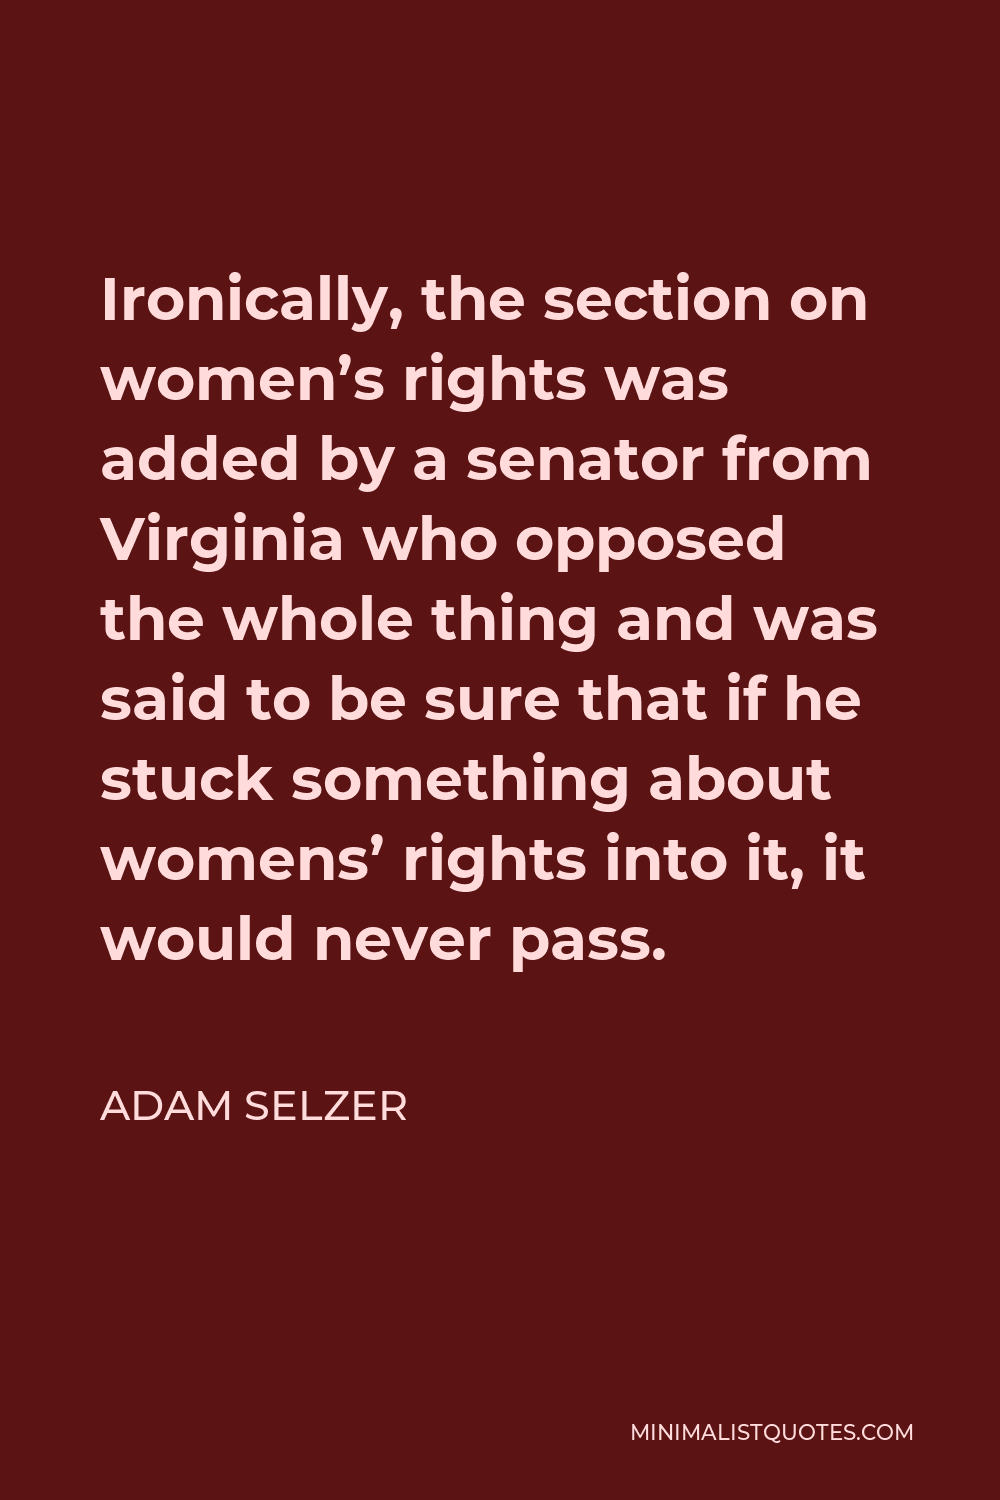 Adam Selzer Quote - Ironically, the section on women’s rights was added by a senator from Virginia who opposed the whole thing and was said to be sure that if he stuck something about womens’ rights into it, it would never pass.